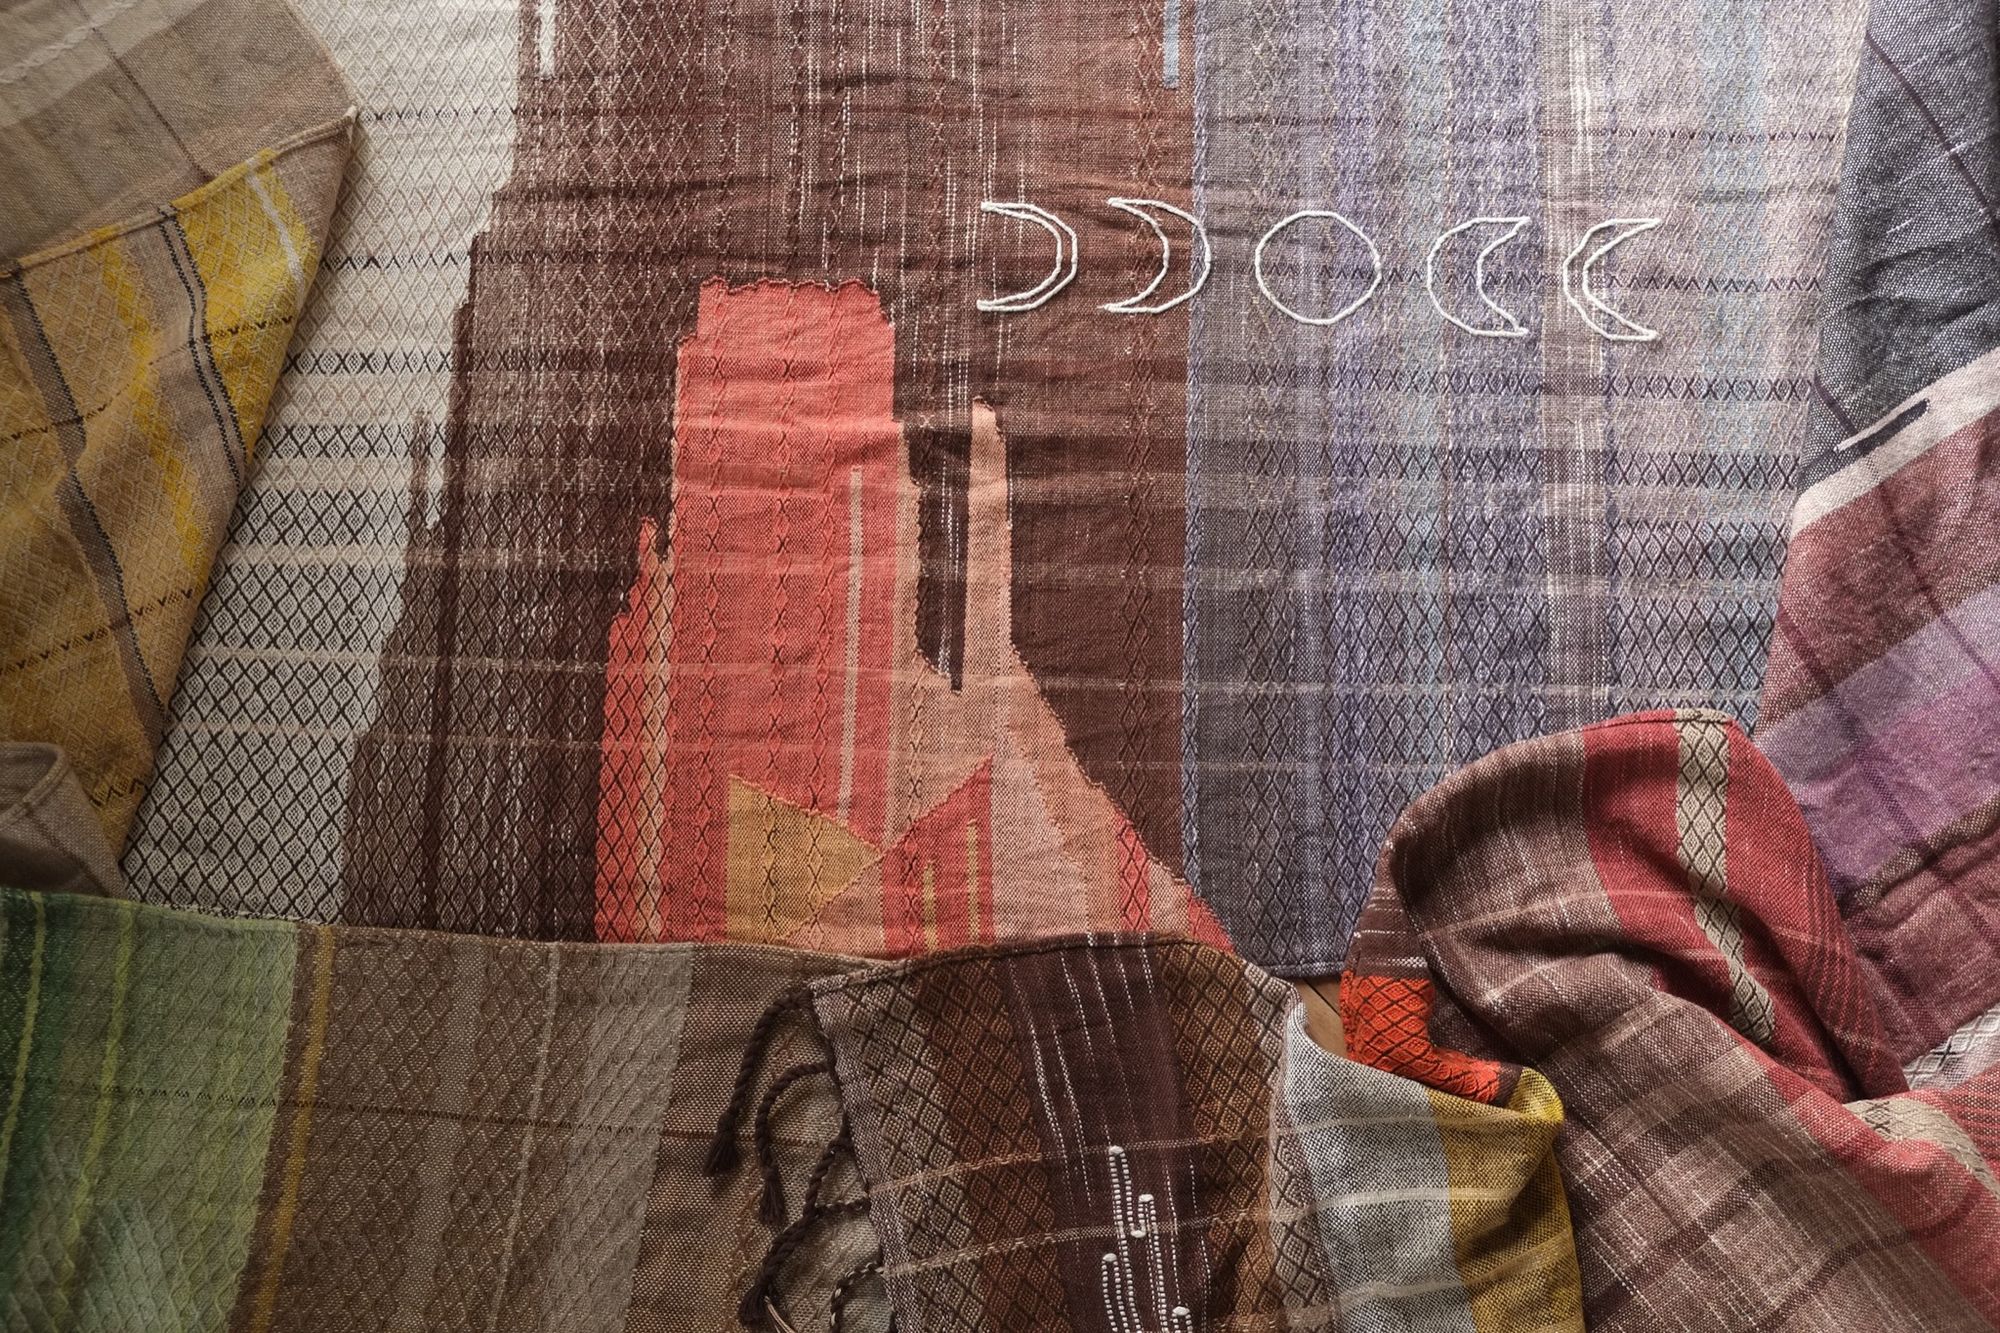 Handwoven fabric with the moon phases and salmon colored stone-shapes woven into it on a background of blue and brown